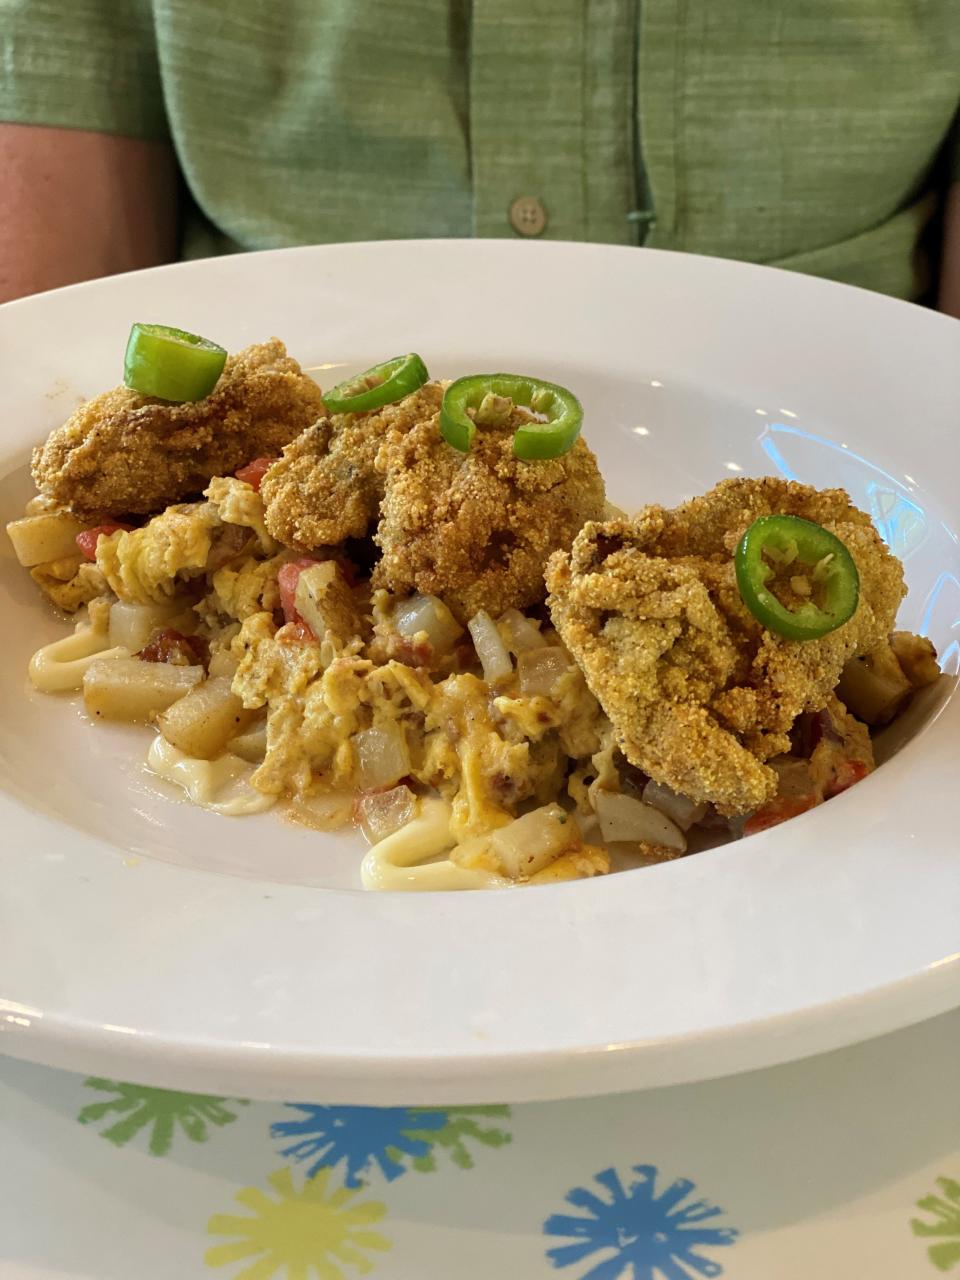 Fried Oyster Scramble "Hangtown" at Big Bad Breakfast. Eggs are scrambled with bacon, potatoes and tomatoes and are topped with fried Gulf oysters.